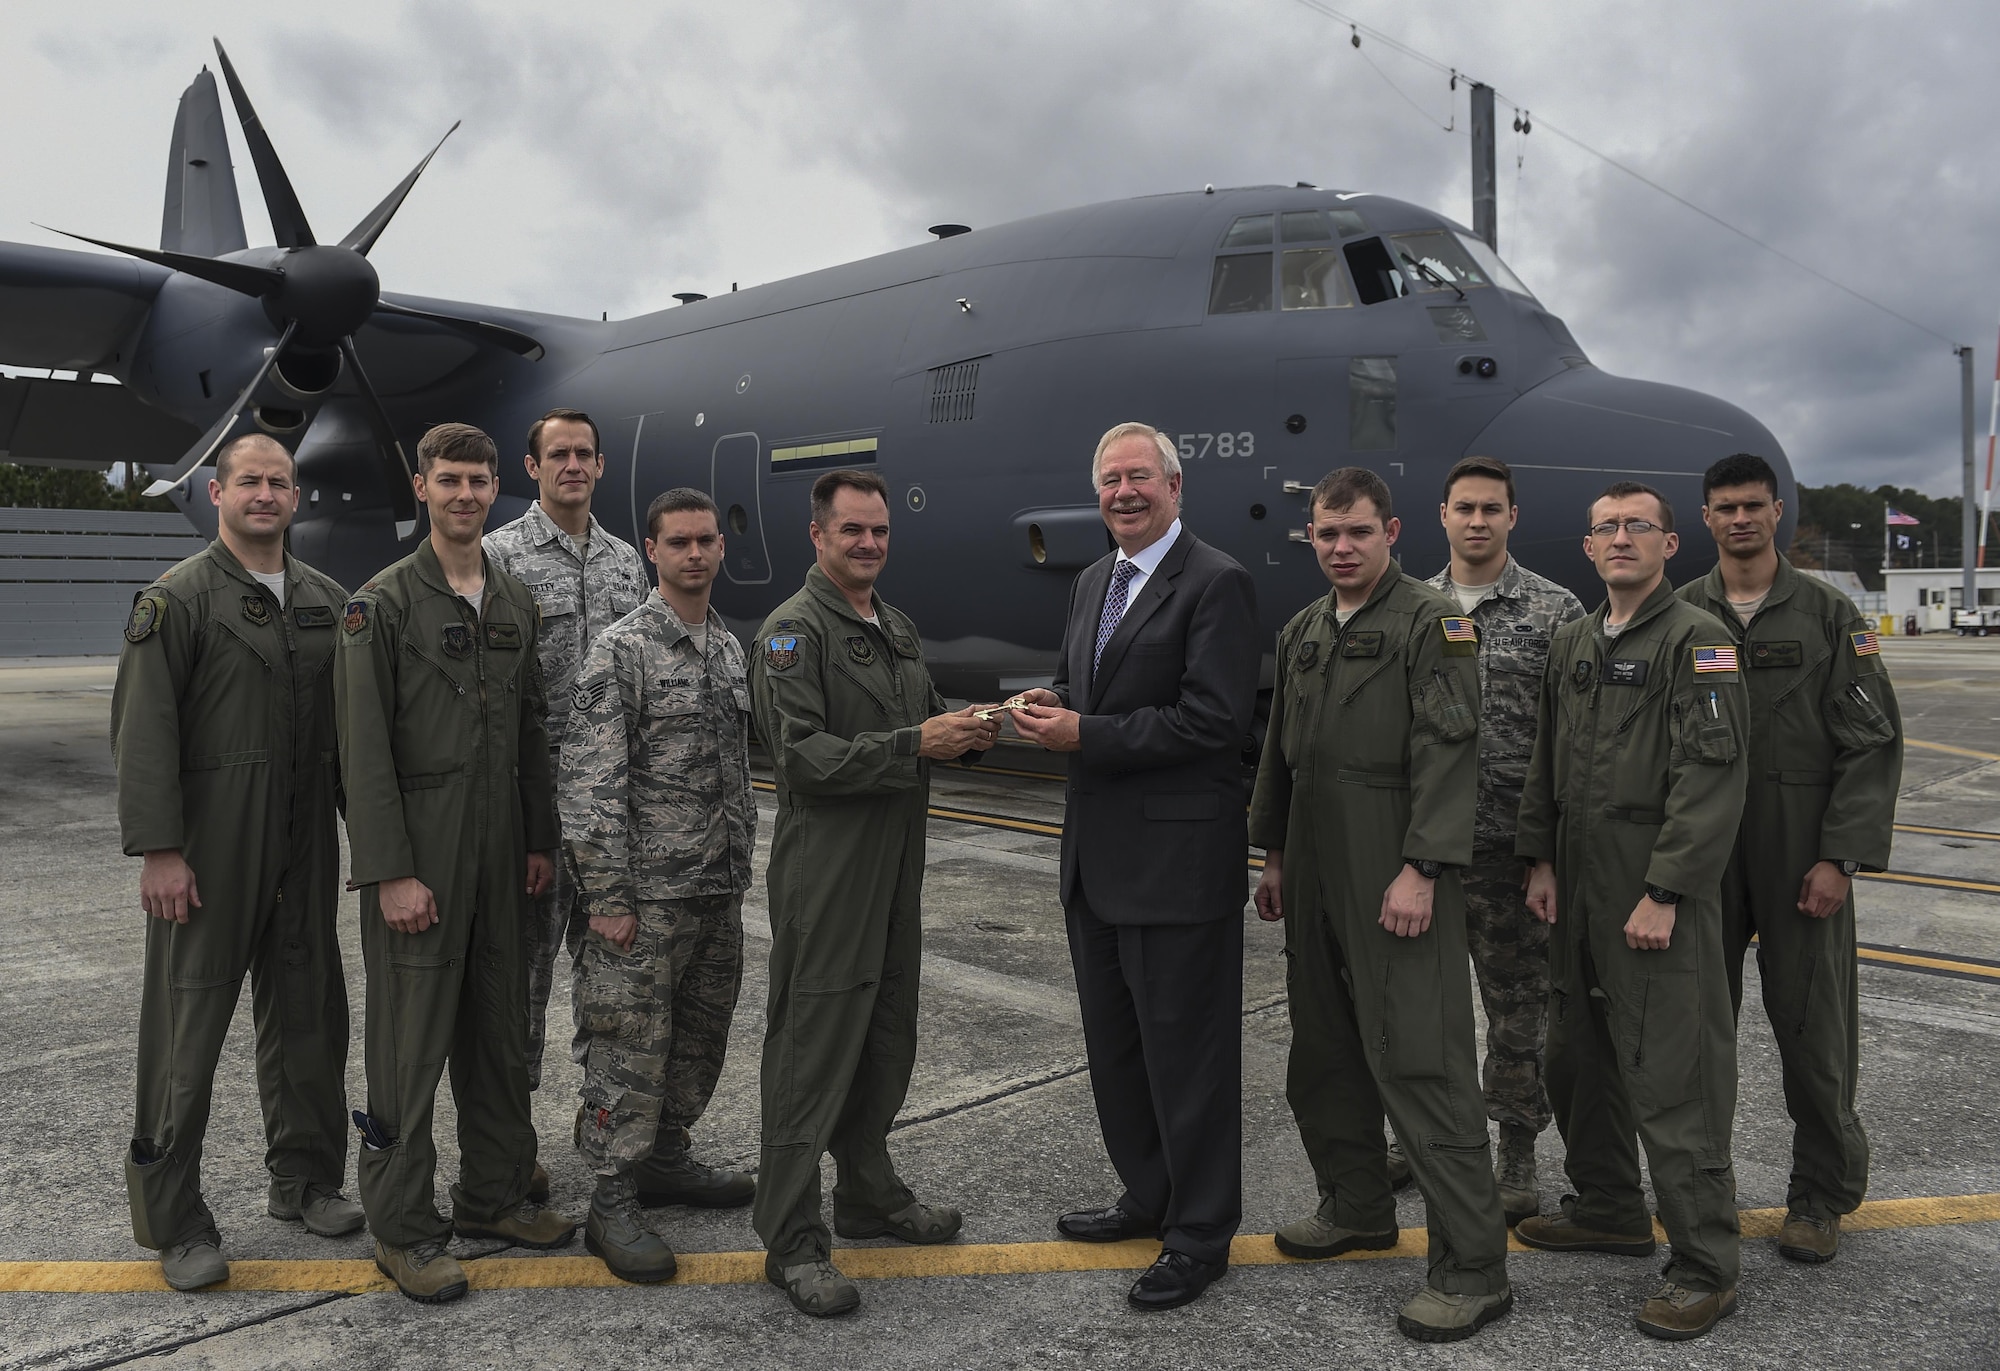 Col. Sean Farrell, commander of the 1st Special Operations Wing, receives a commemorative key to the MC-130J Commando II from Ray Fajay, director of air mobility business development at Lockheed Martin, at Lockheed Martin in Marietta, Ga., Dec. 11, 2015. The MC-130J will undergo modifications to become an AC-130J Ghostrider, which will provide the 1 SOW with close air support and air interdiction capabilities. (U.S. Air Force photo by Senior Airman Ryan Conroy)